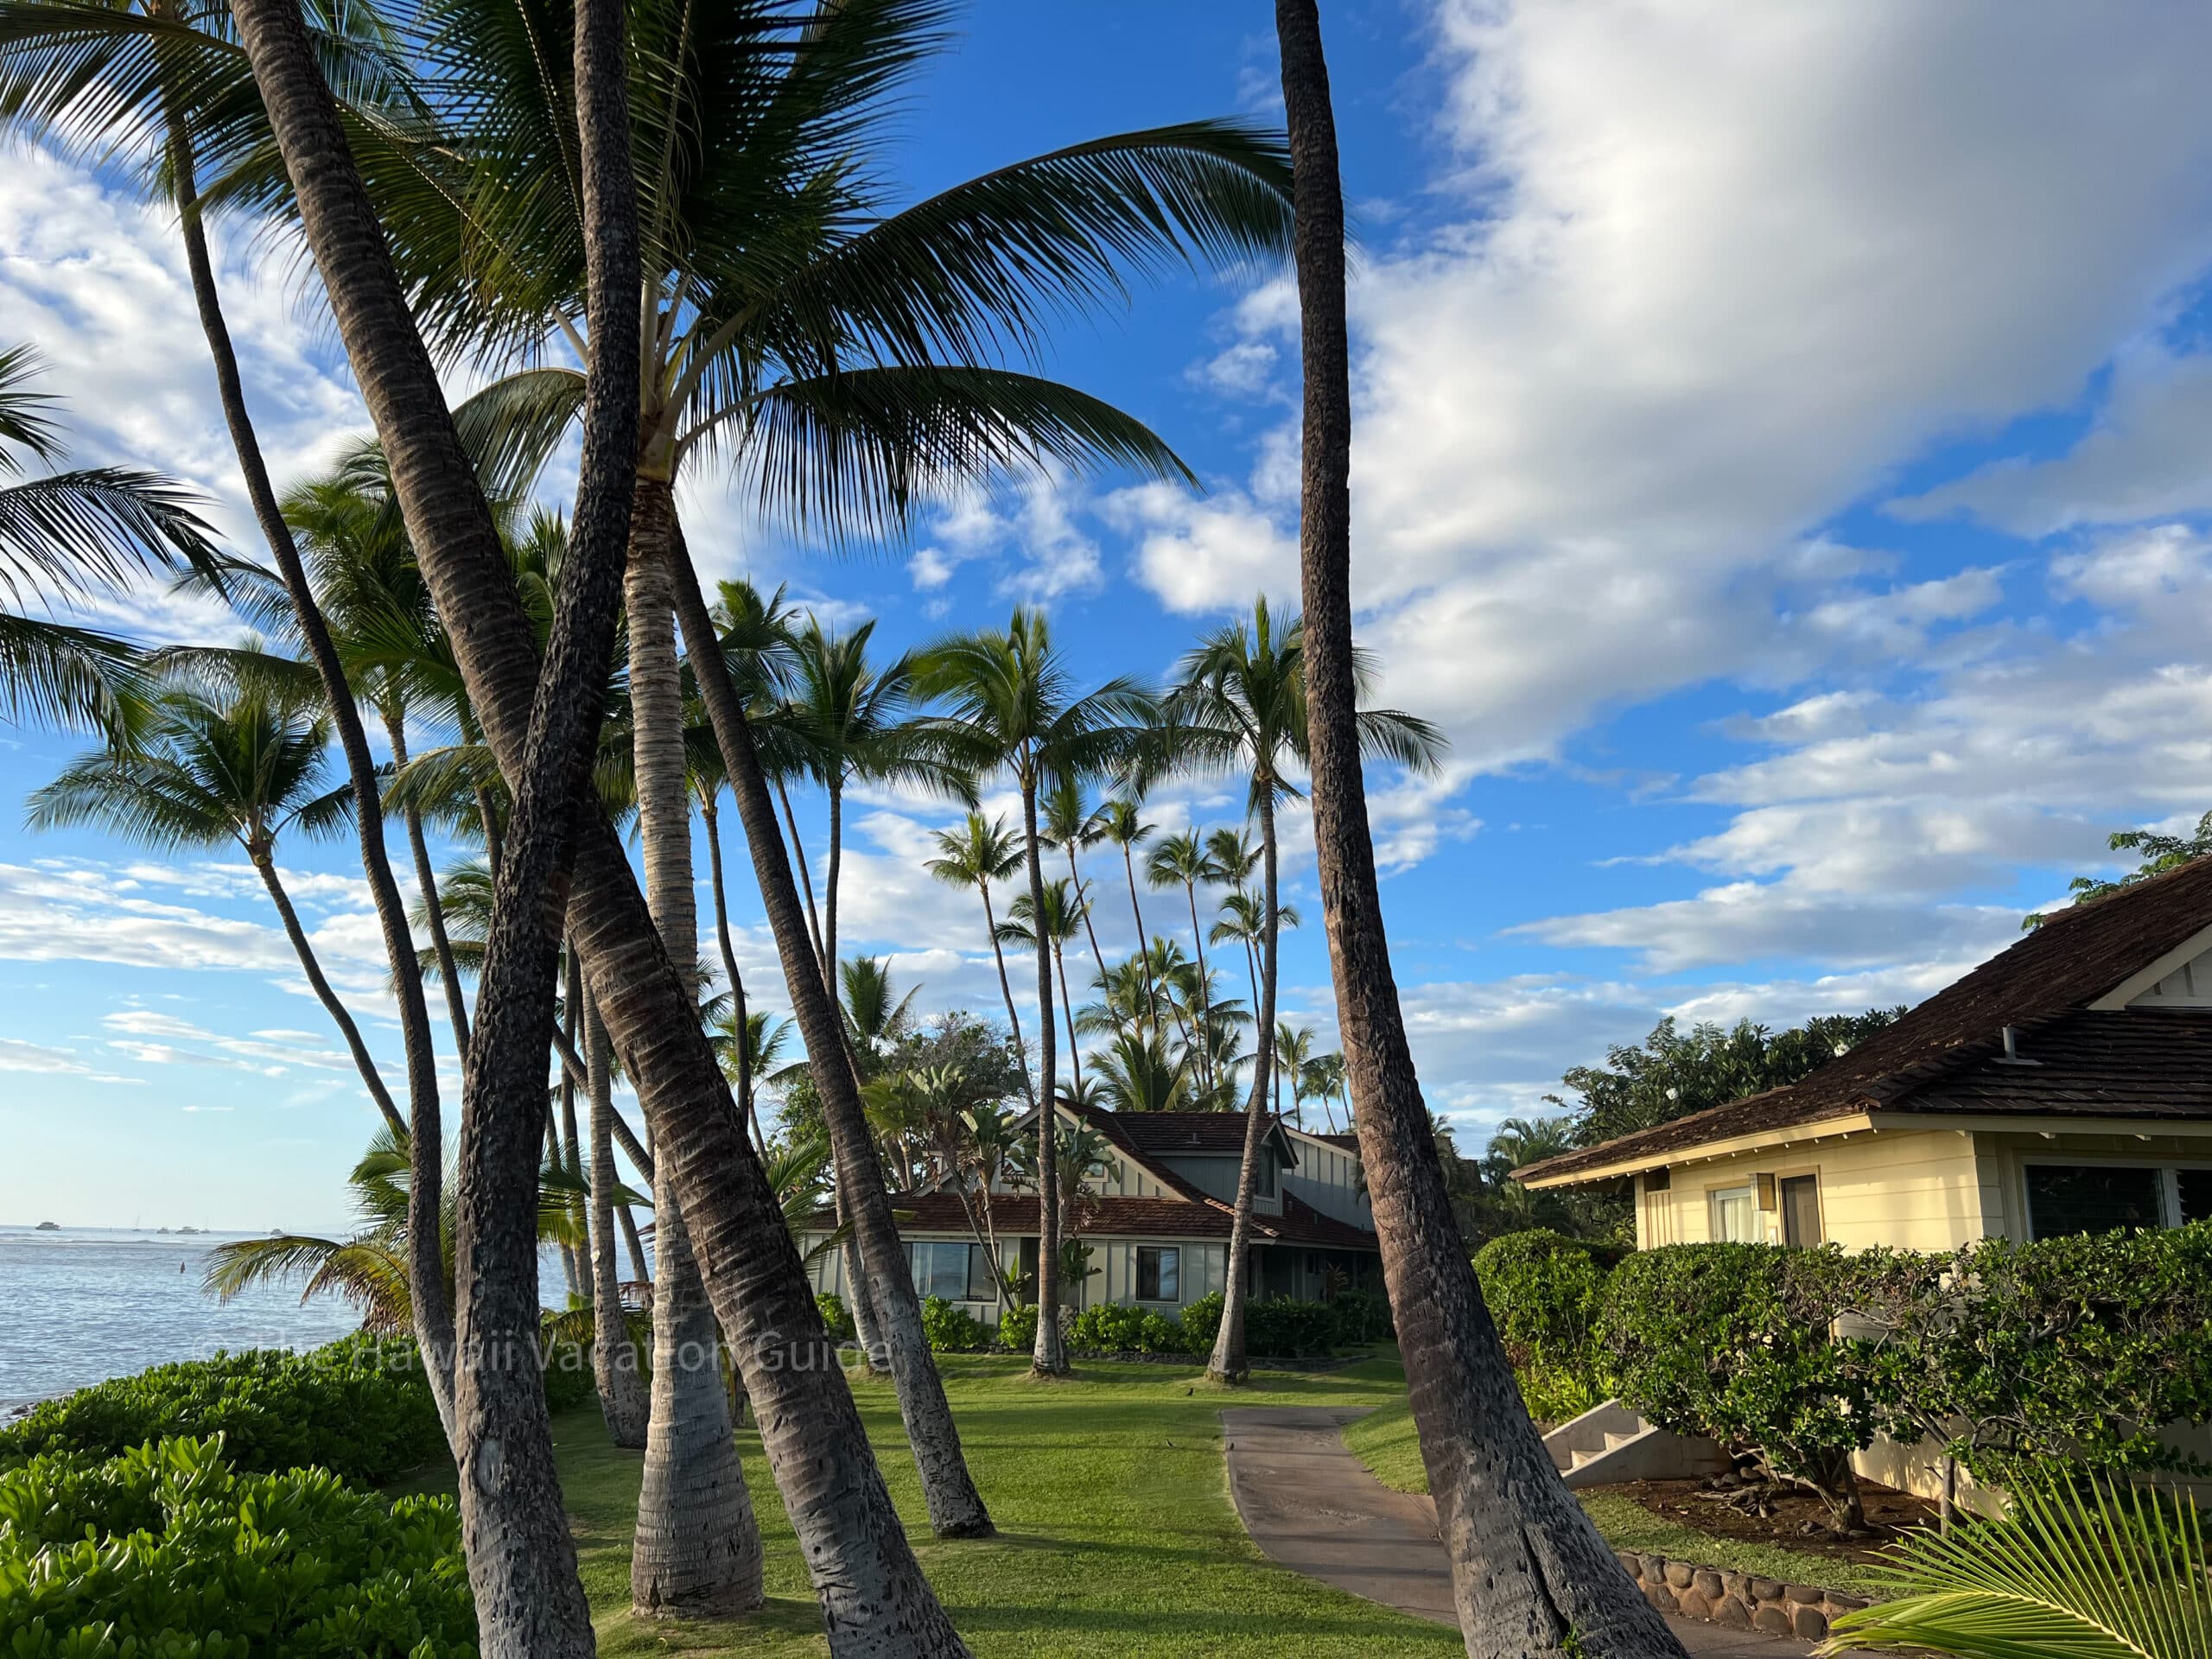 Is Airbnb legal in Hawaii